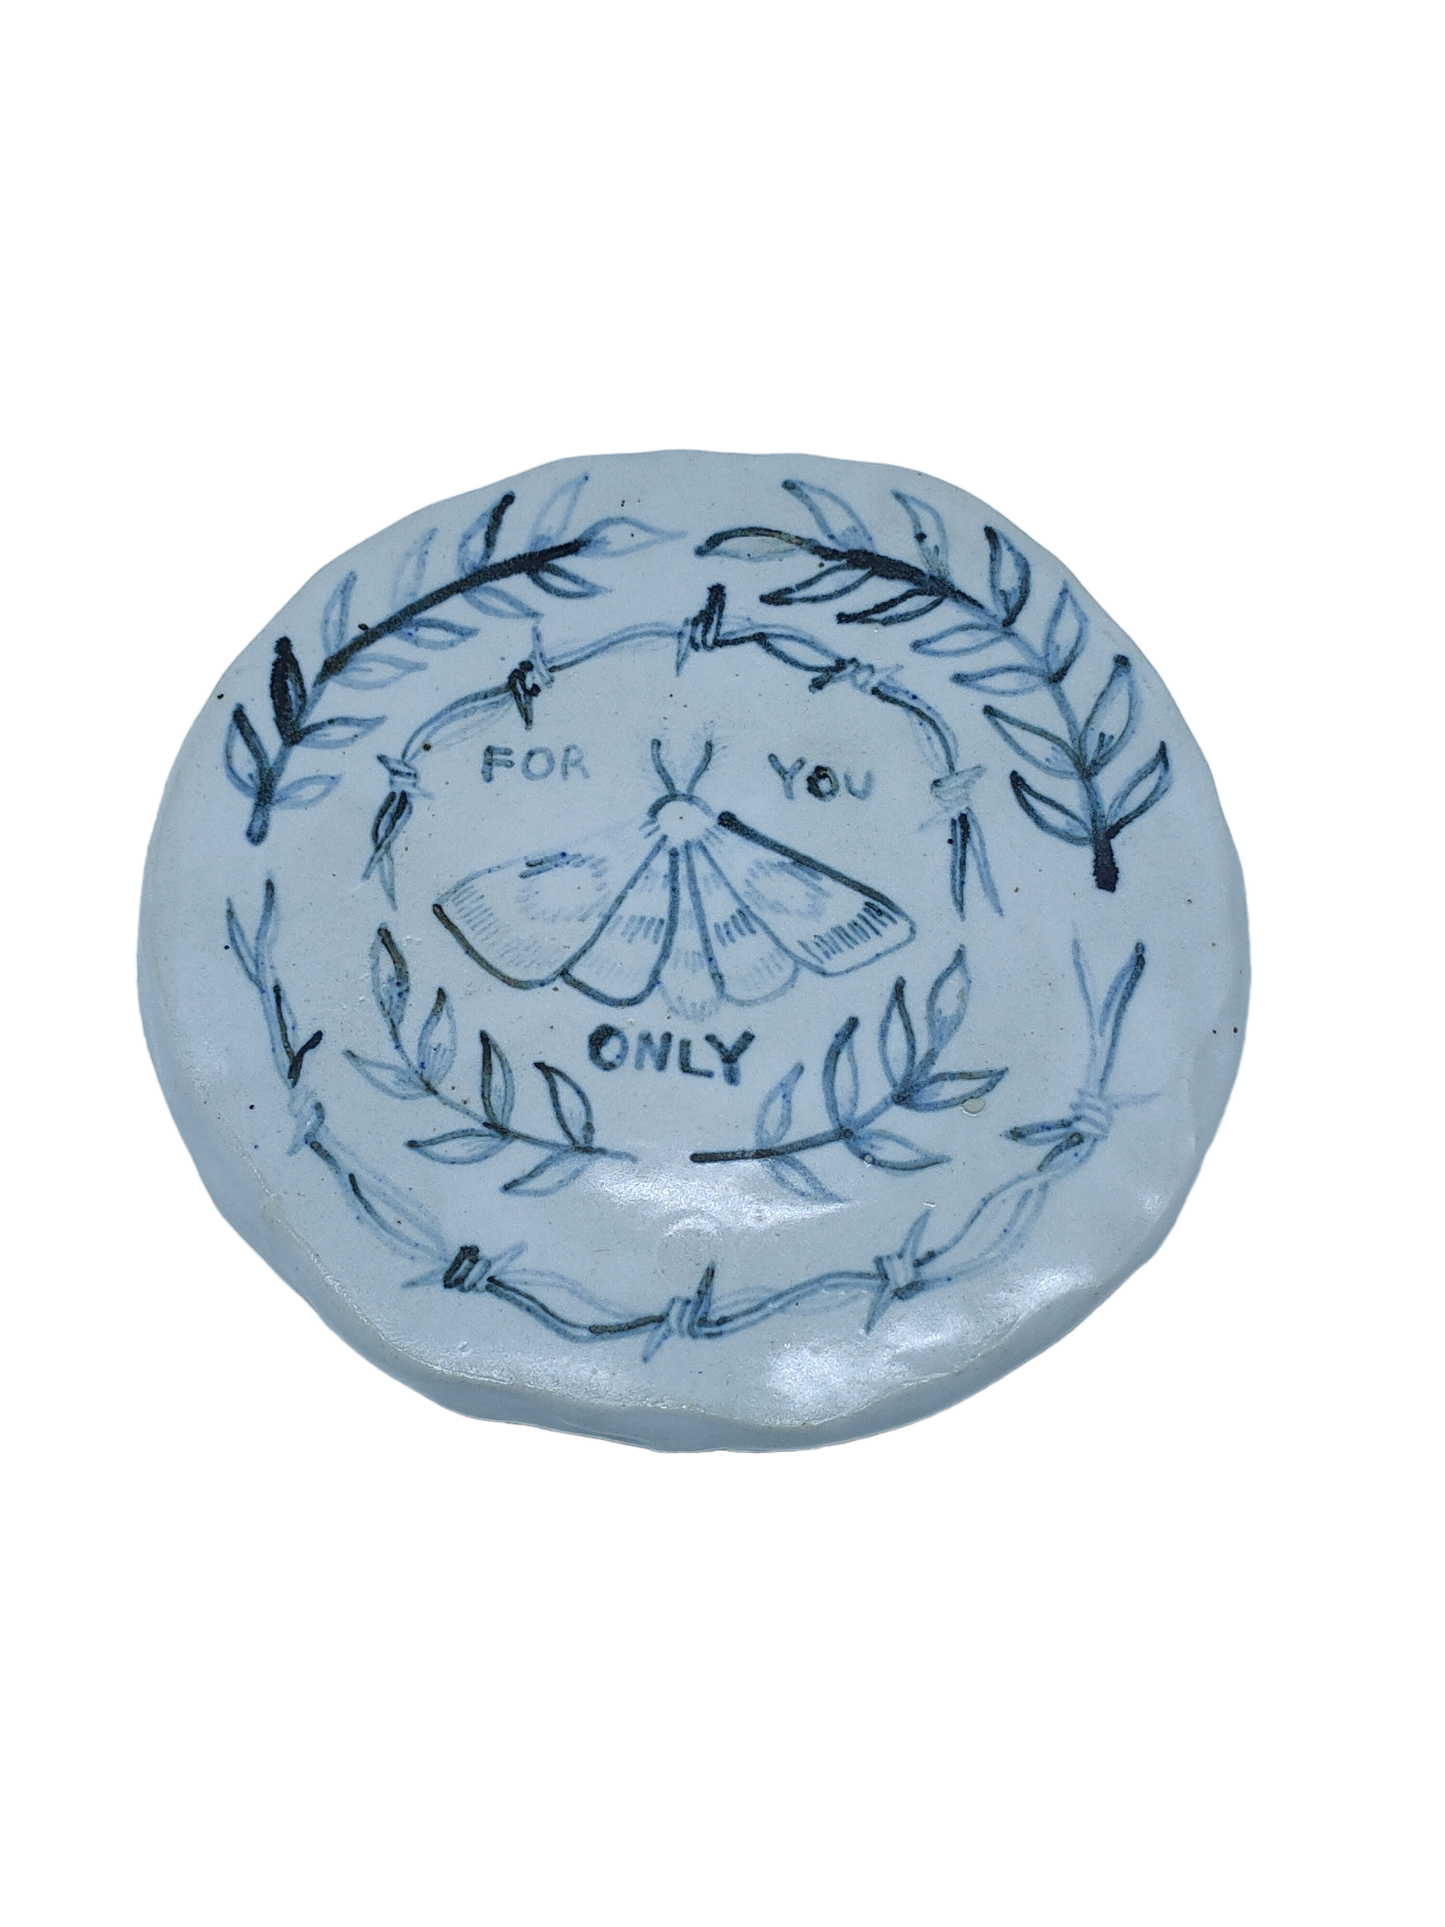 AD x Futile Odds Confession Trinket Dish - For You Only